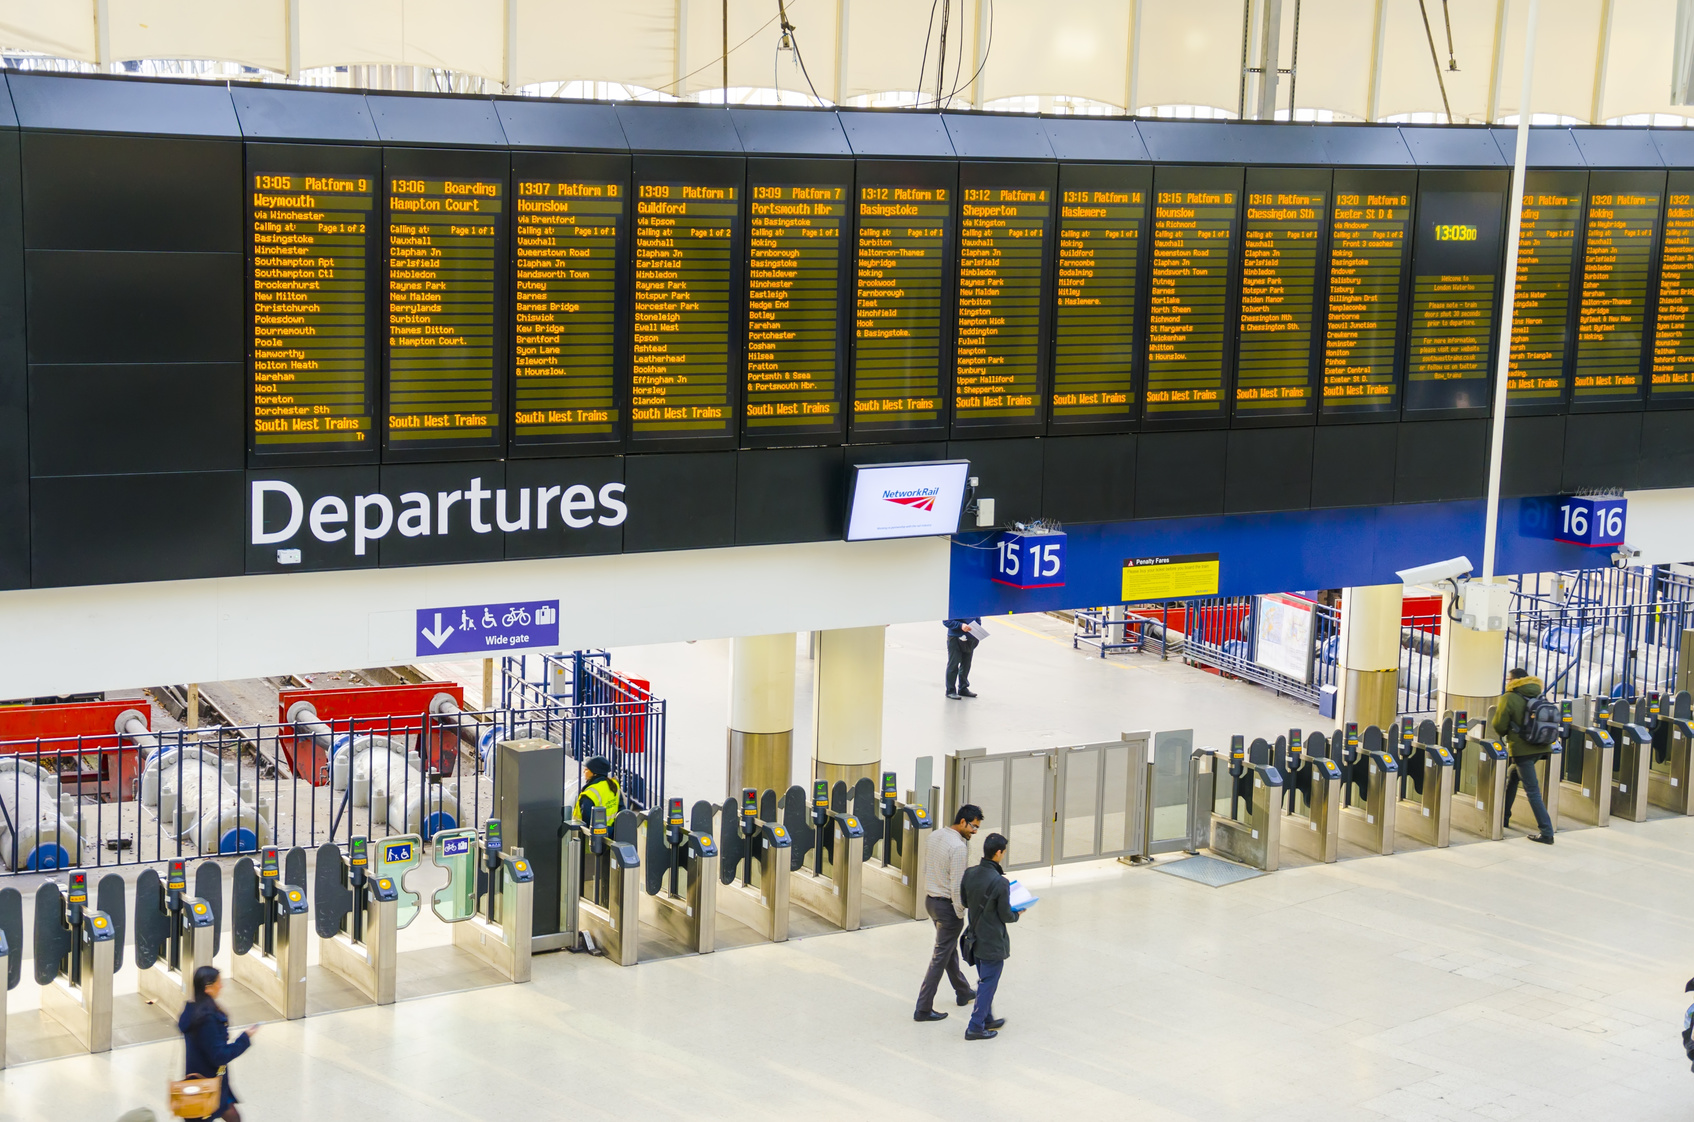 the rail delivery group looked at the efficiency of train services in relation to passenger generated revenue